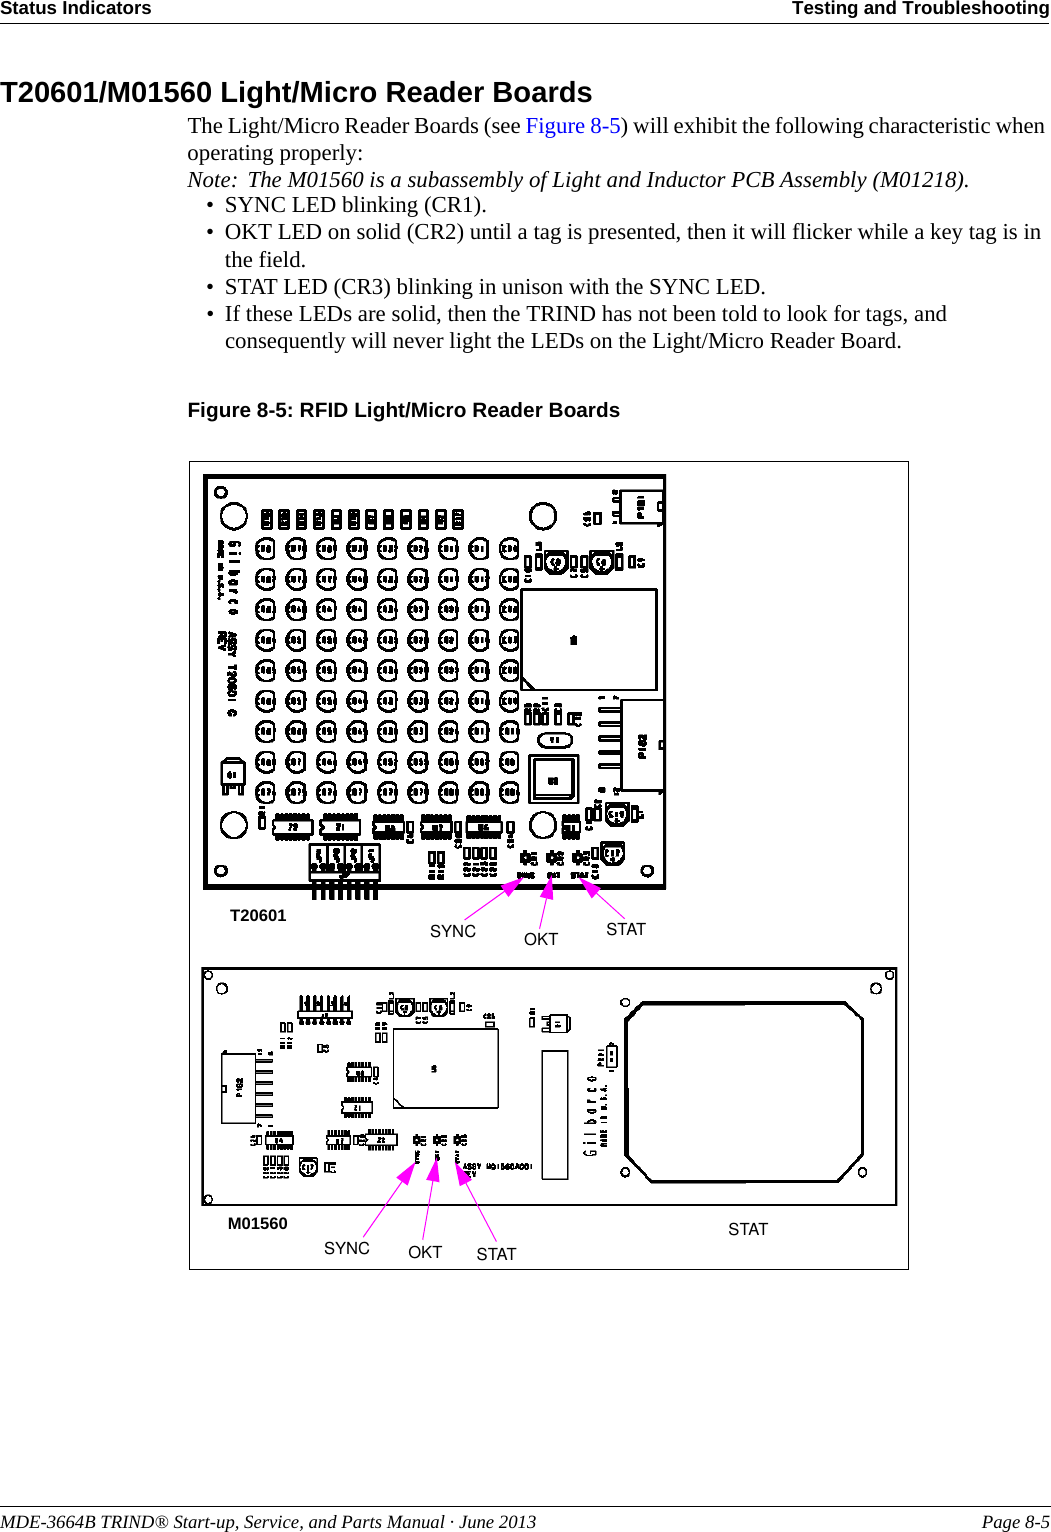 MDE-3664B TRIND® Start-up, Service, and Parts Manual · June 2013 Page 8-5Status Indicators Testing and TroubleshootingT20601/M01560 Light/Micro Reader BoardsThe Light/Micro Reader Boards (see Figure 8-5) will exhibit the following characteristic when operating properly:Note: The M01560 is a subassembly of Light and Inductor PCB Assembly (M01218).• SYNC LED blinking (CR1).• OKT LED on solid (CR2) until a tag is presented, then it will flicker while a key tag is in the field.• STAT LED (CR3) blinking in unison with the SYNC LED.• If these LEDs are solid, then the TRIND has not been told to look for tags, and consequently will never light the LEDs on the Light/Micro Reader Board. Figure 8-5: RFID Light/Micro Reader BoardsSYNC OKT STATSYNC OKT STATSTATT20601M01560